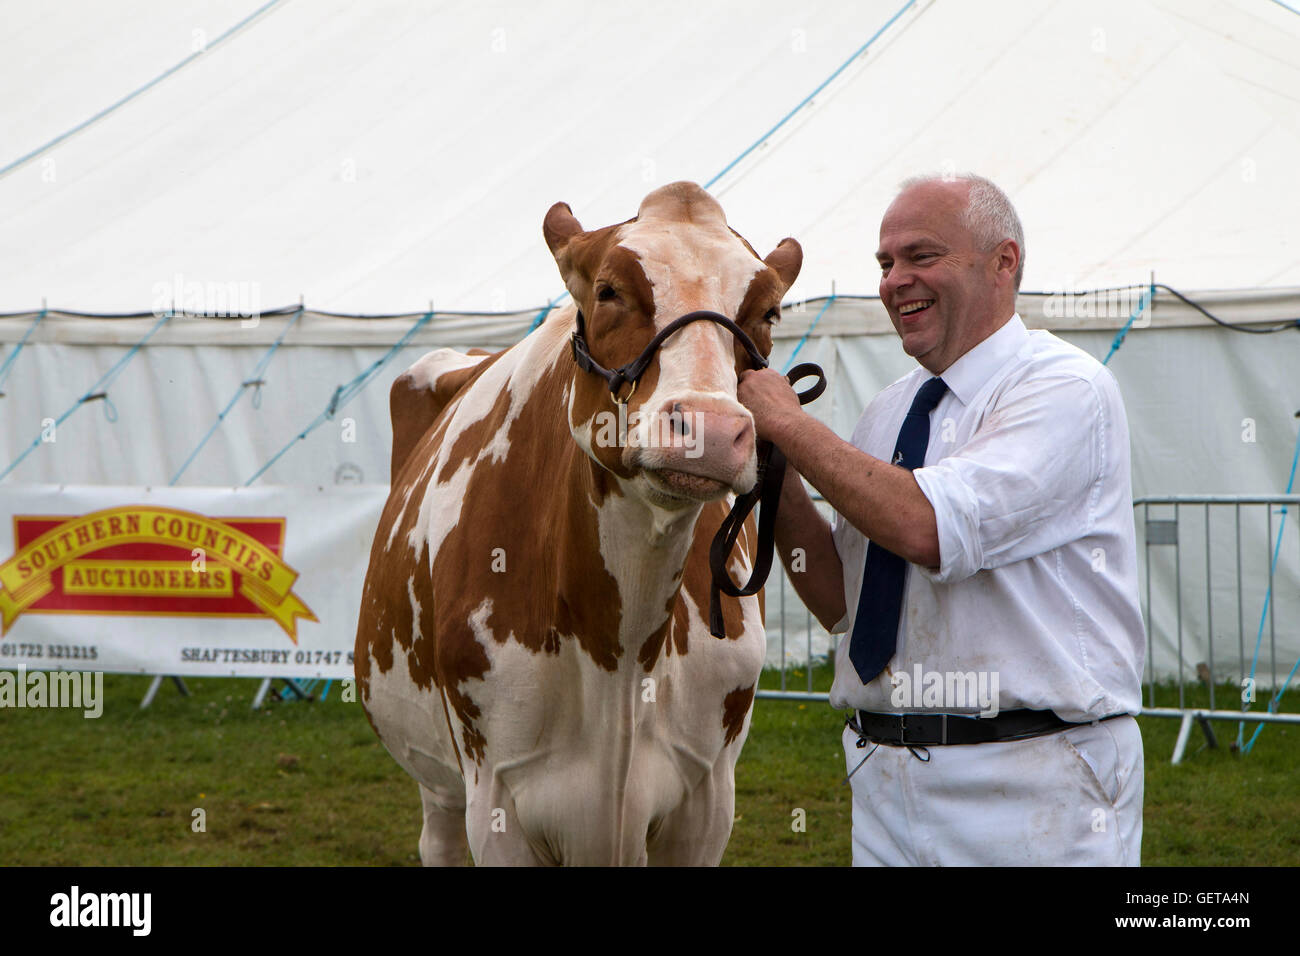 Owner proudly showing off his prize winning Ayrshire cow at the New Forest Show on 26 July 2016 Stock Photo